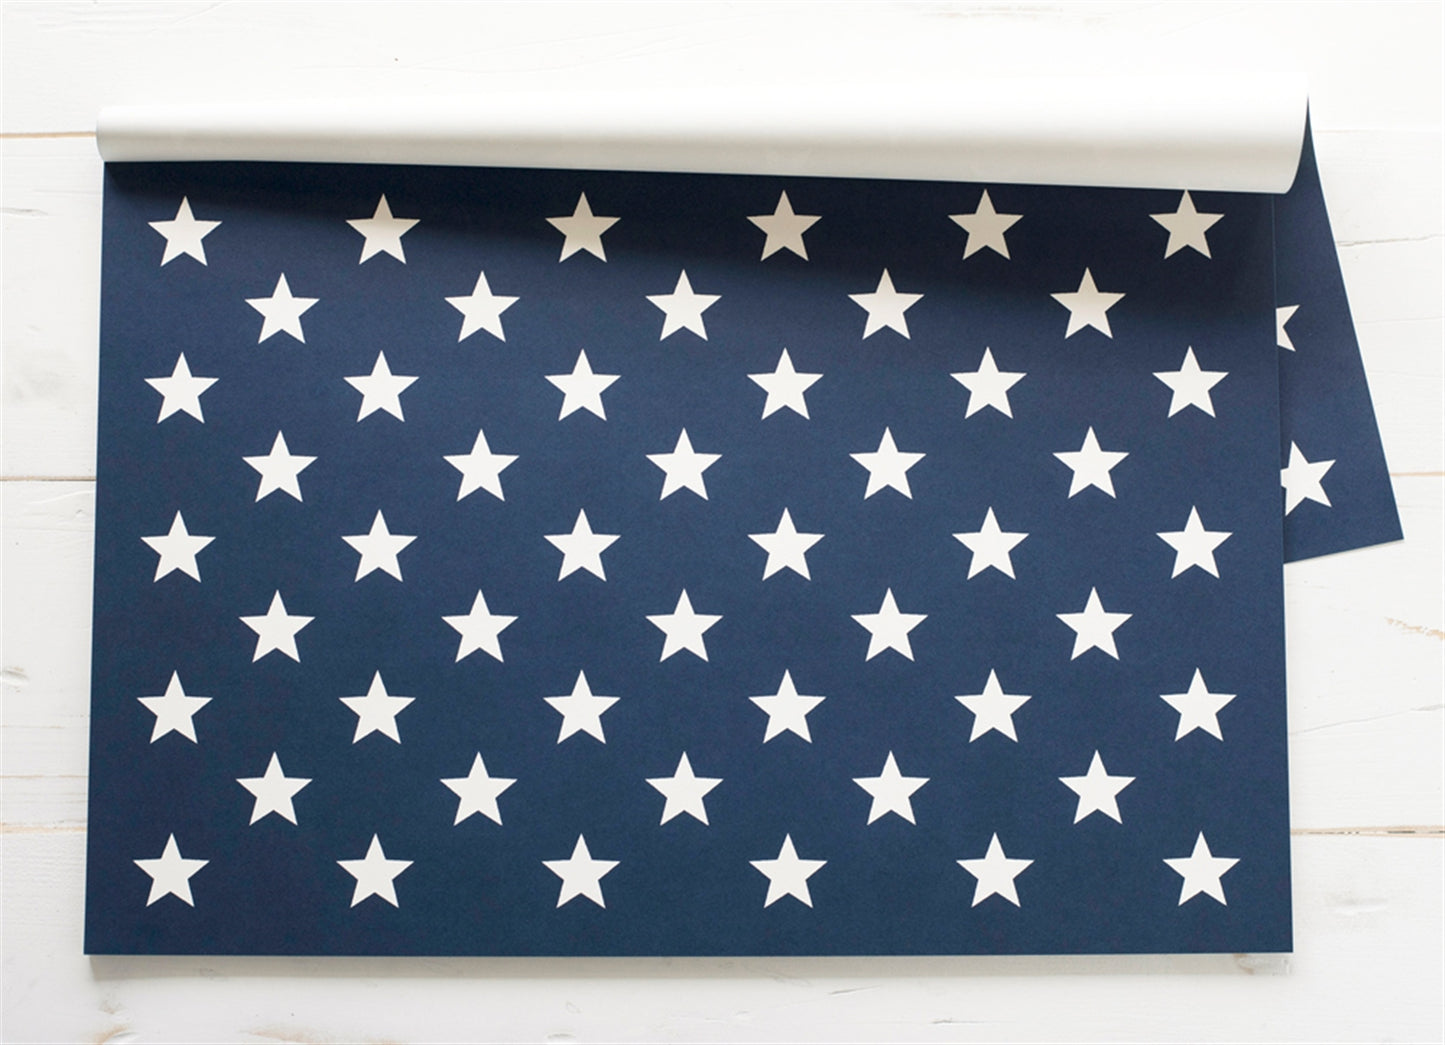 Disposable blue and white star placemats. Navy Blue background with White Stars. Great for patriotic holidays.